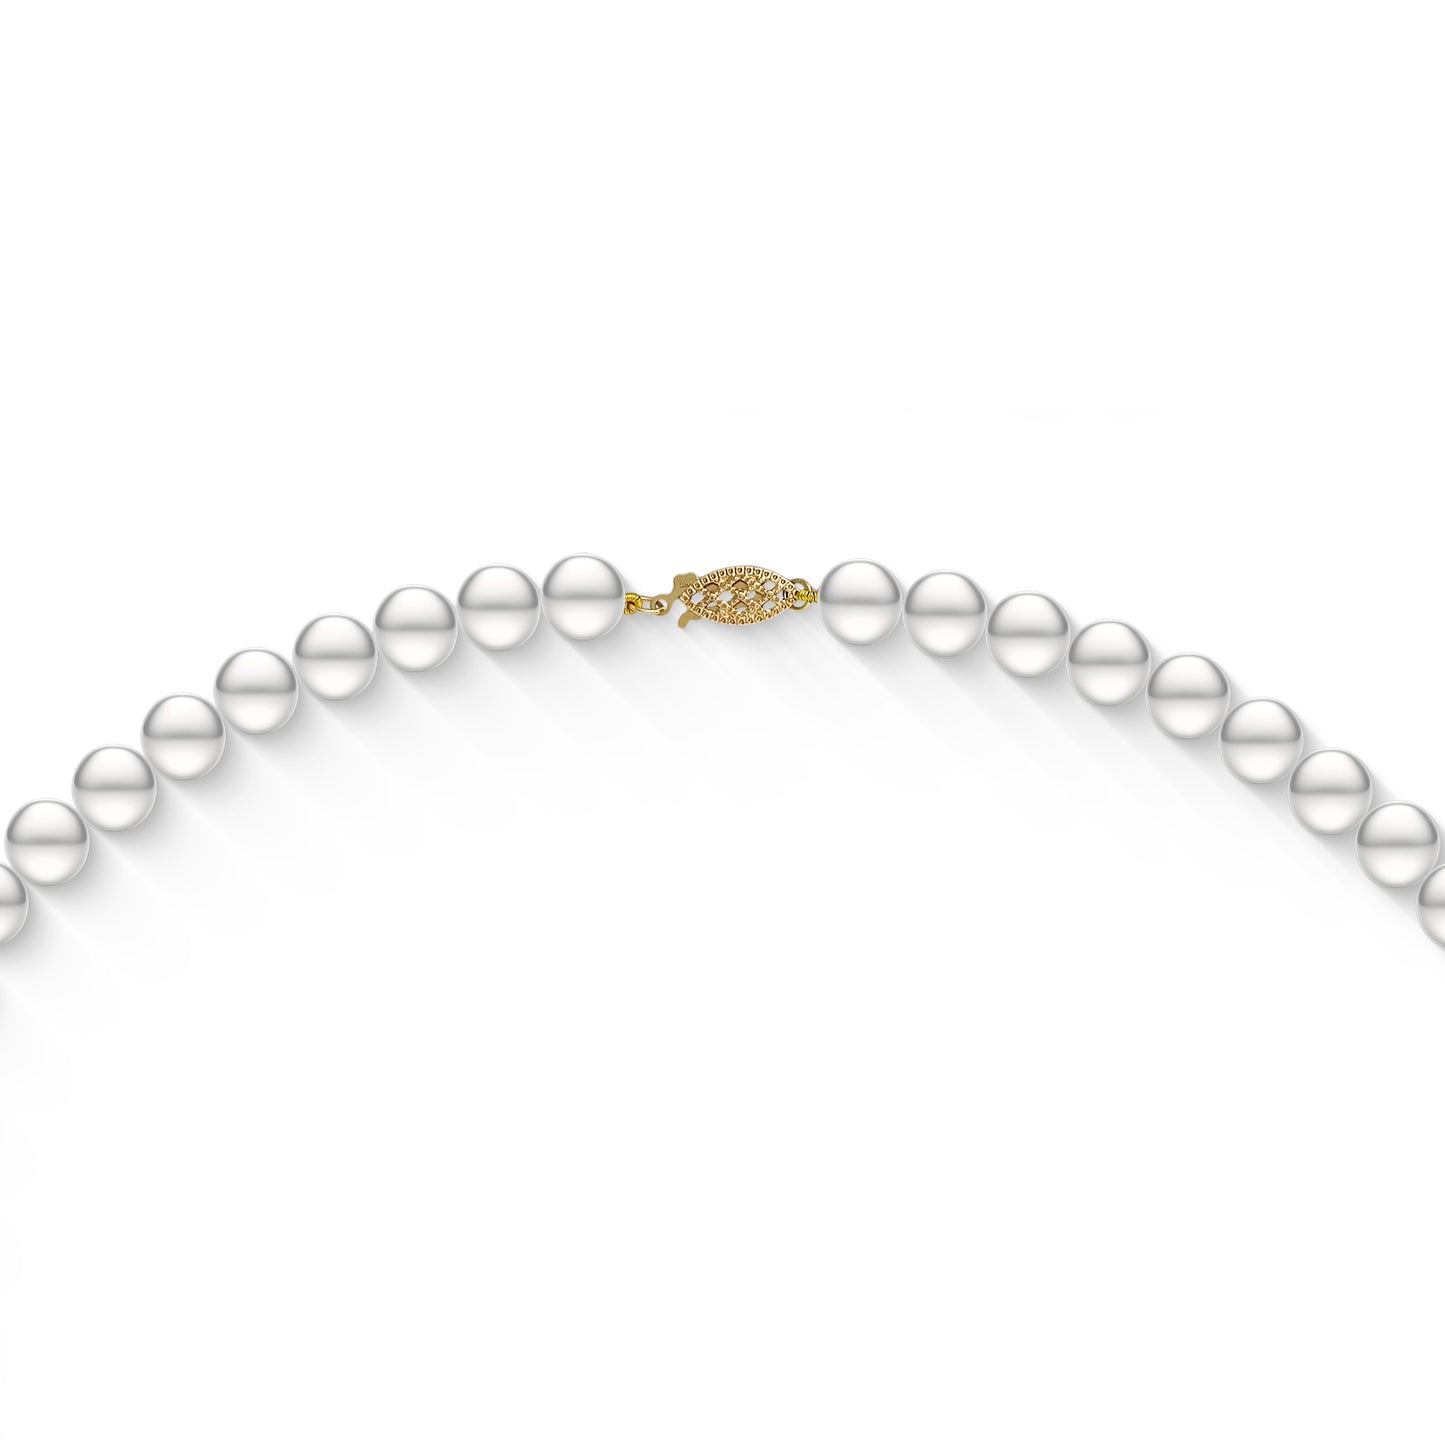 773199 - 14K Yellow Gold - White Freshwater Pearl Necklace Strand